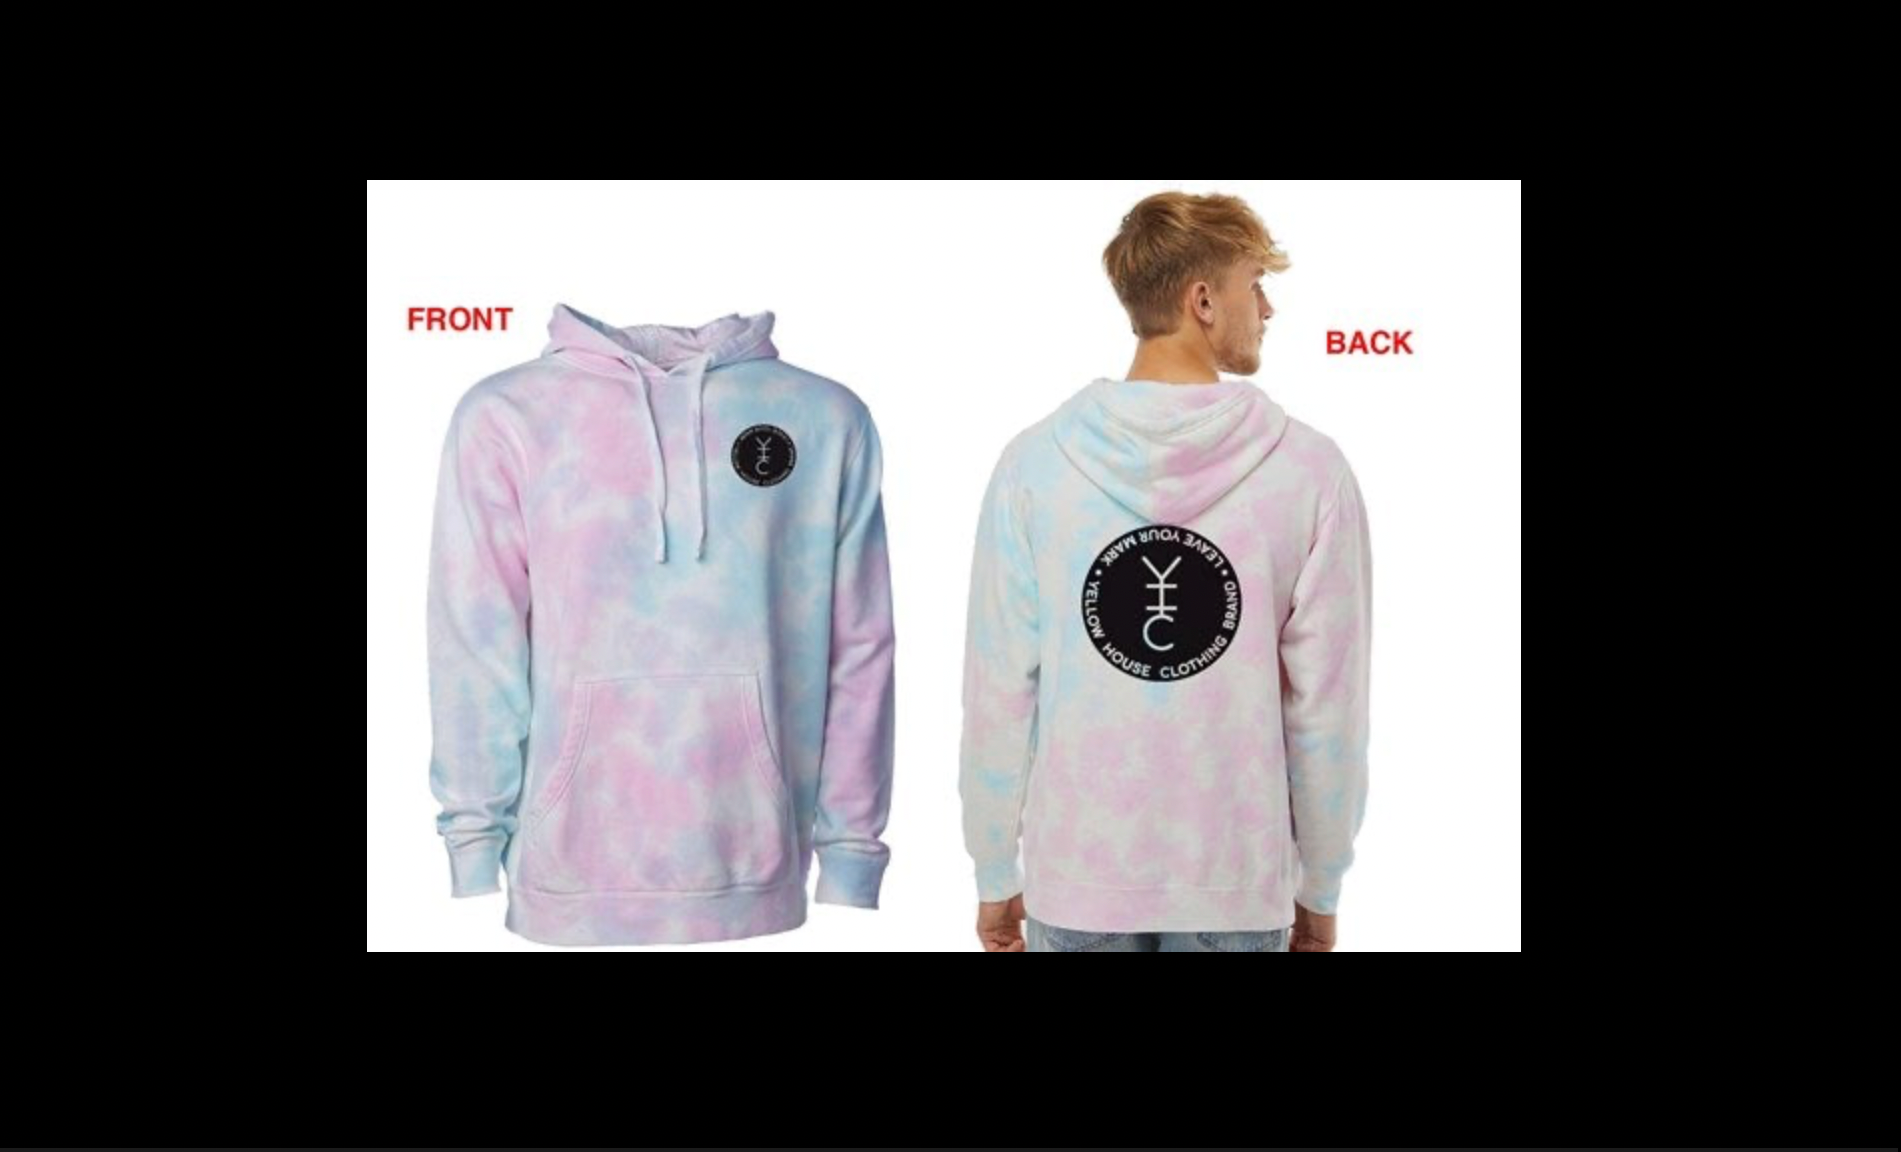 Expression Tees Save It for The Judge 99 Youth-Sized Hoodie - Tie-Dye Cotton Candy Medium